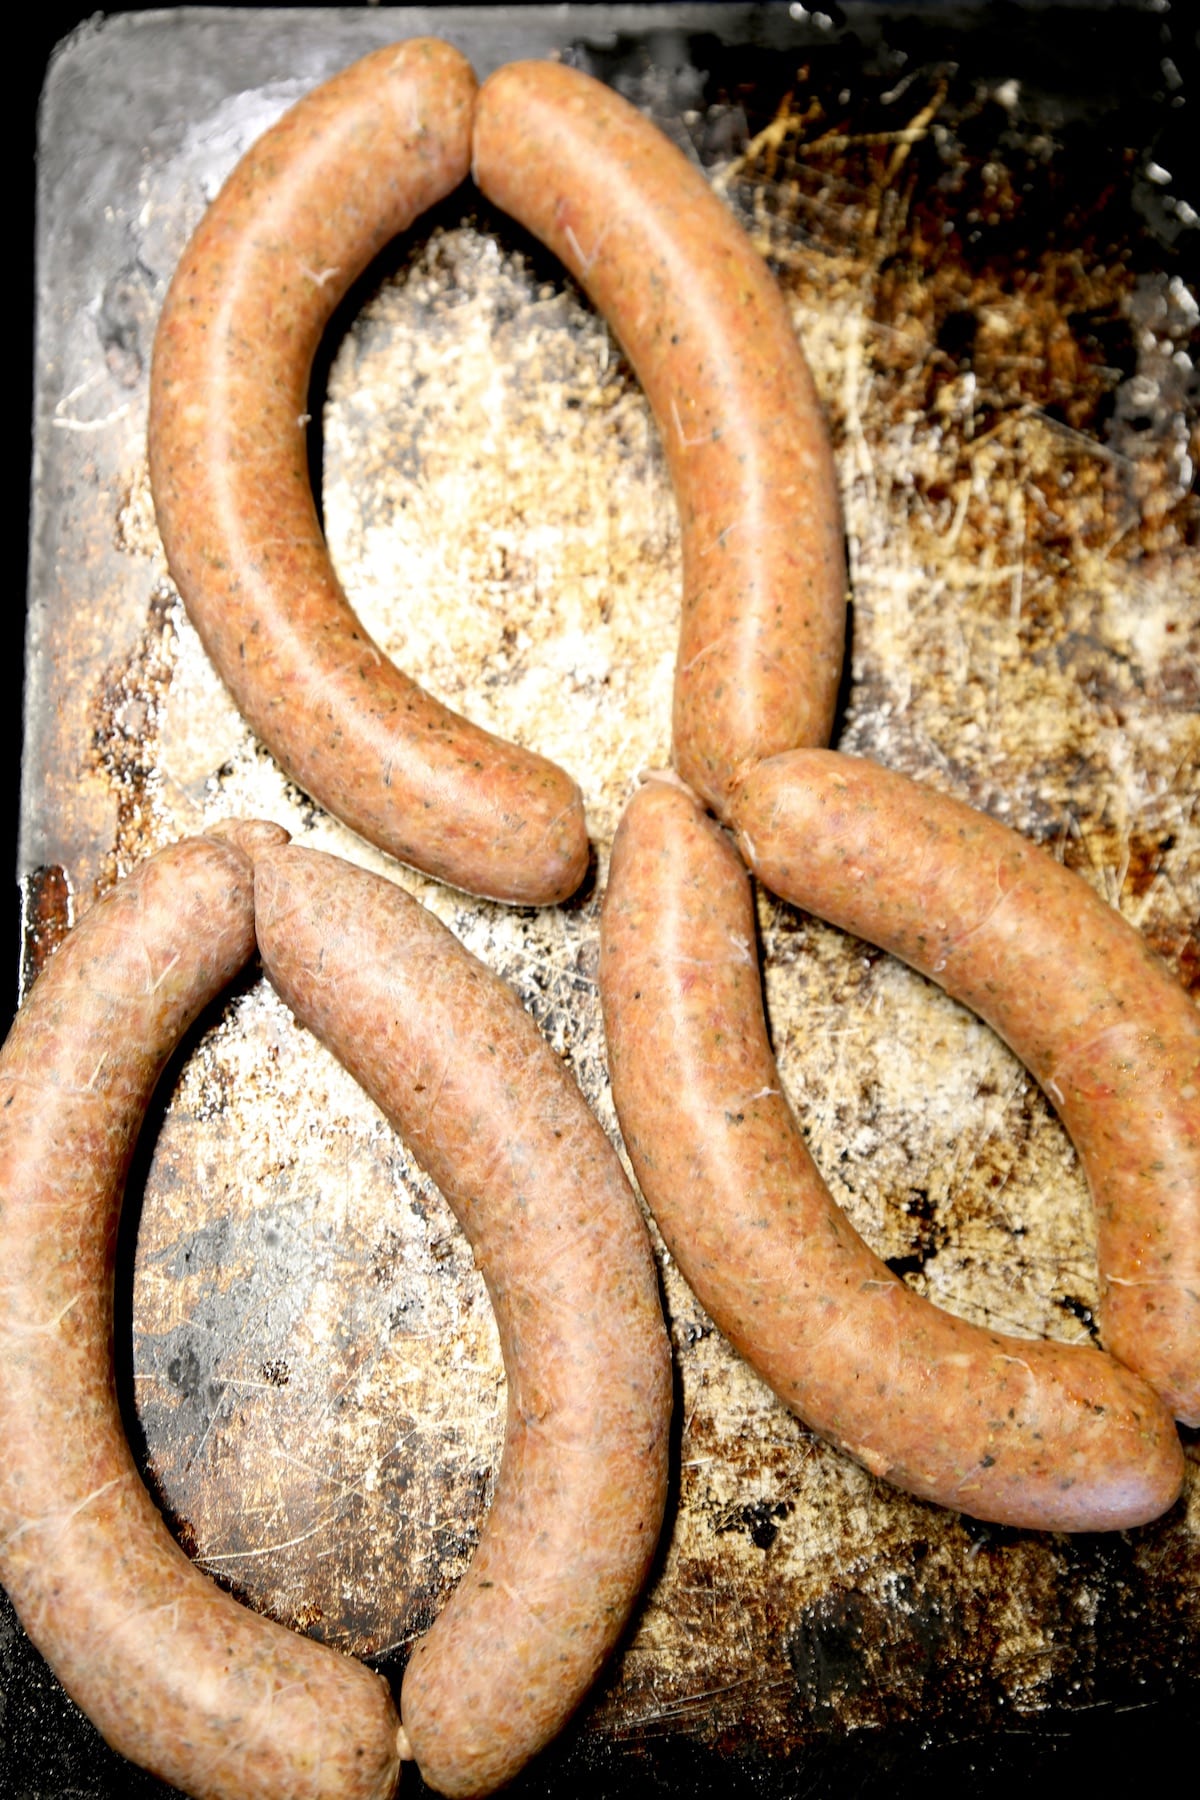 Italian Sausage links - not cooked.